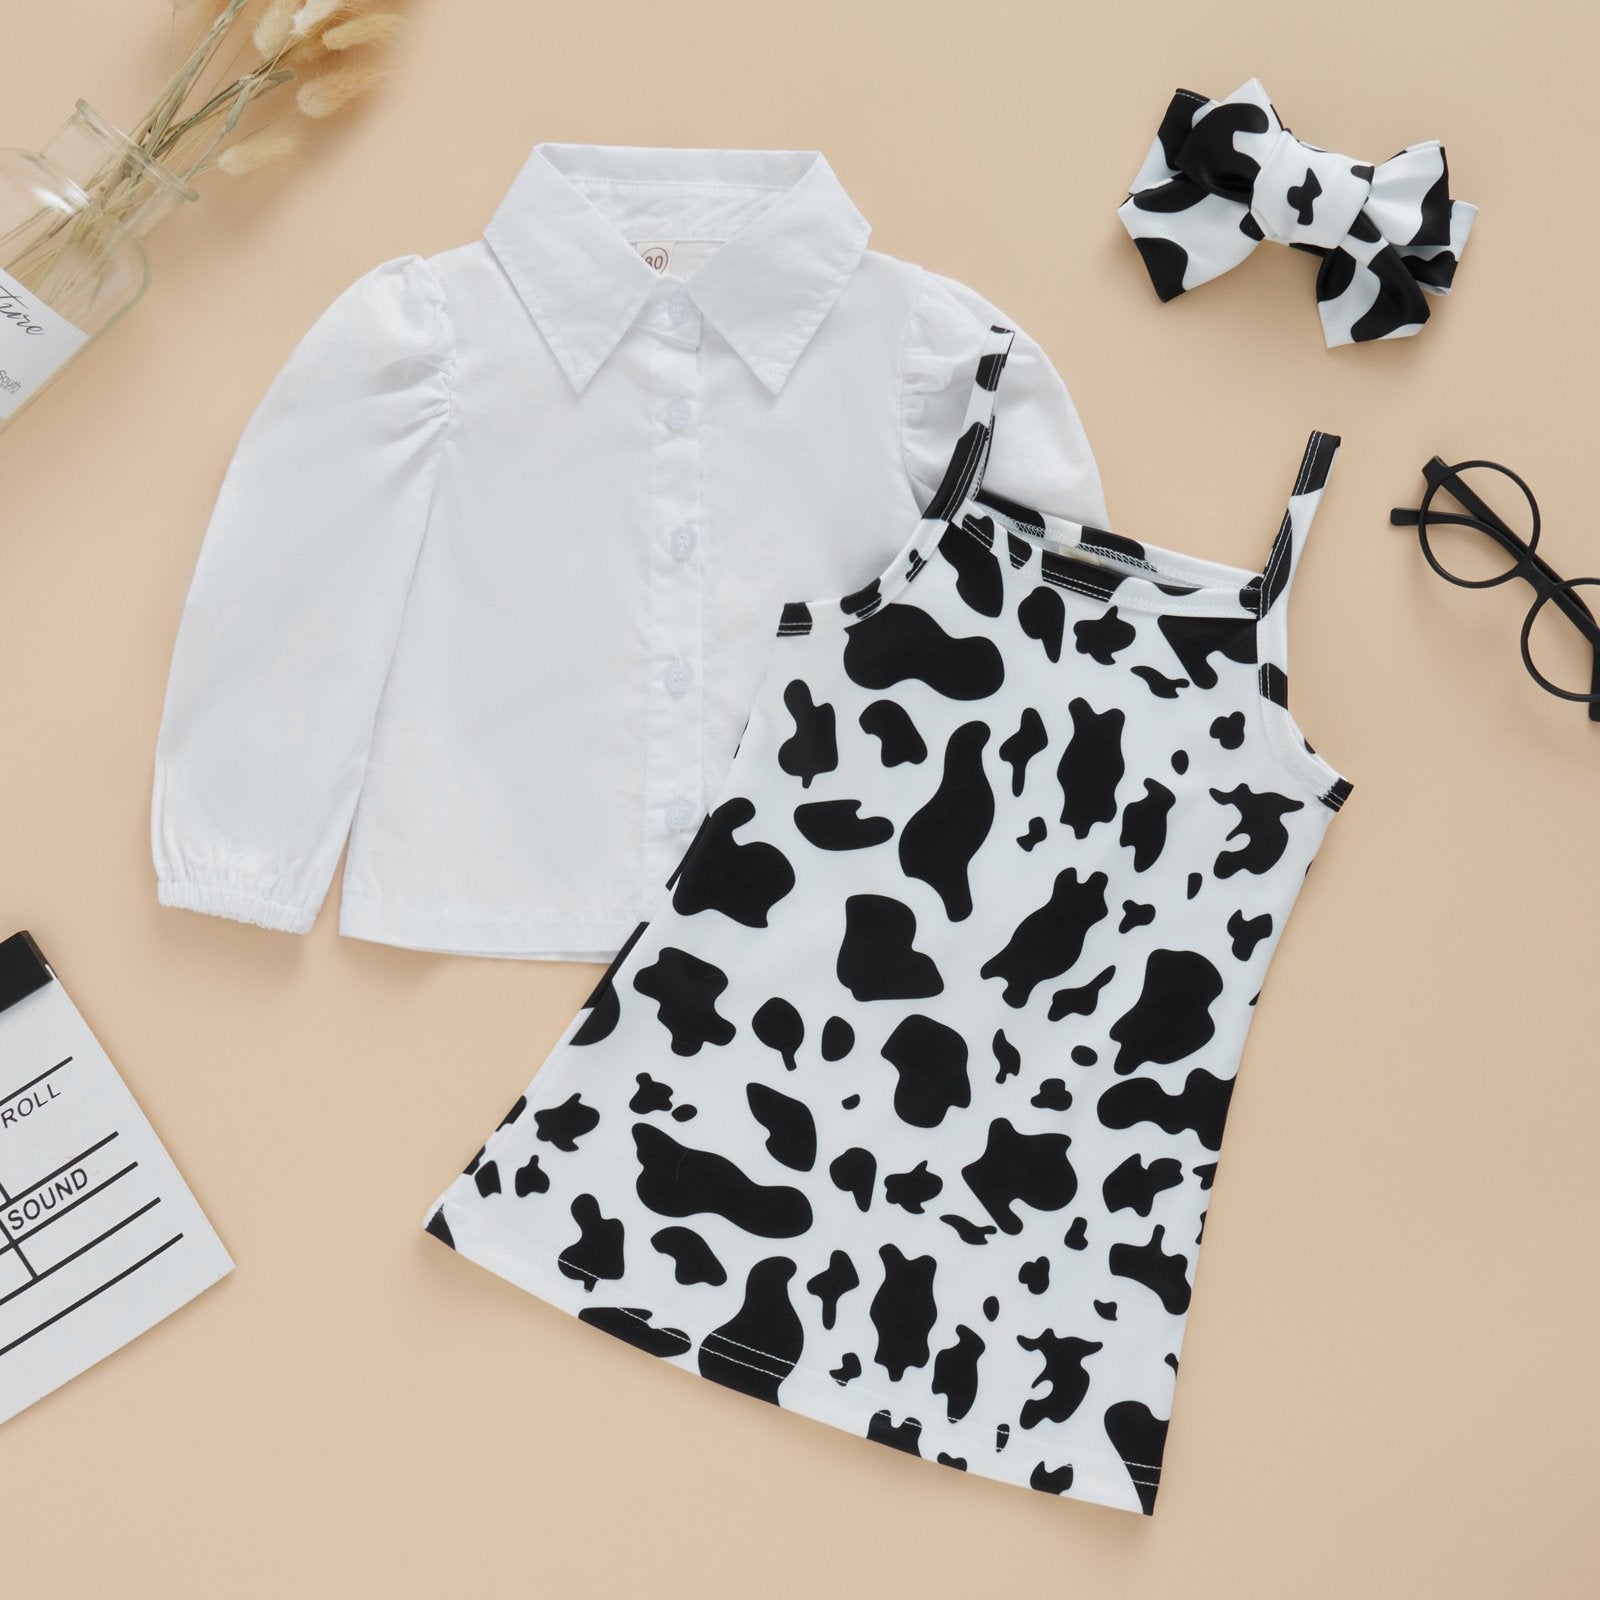 Baby Cow Sling Dress Suit Pawlulu